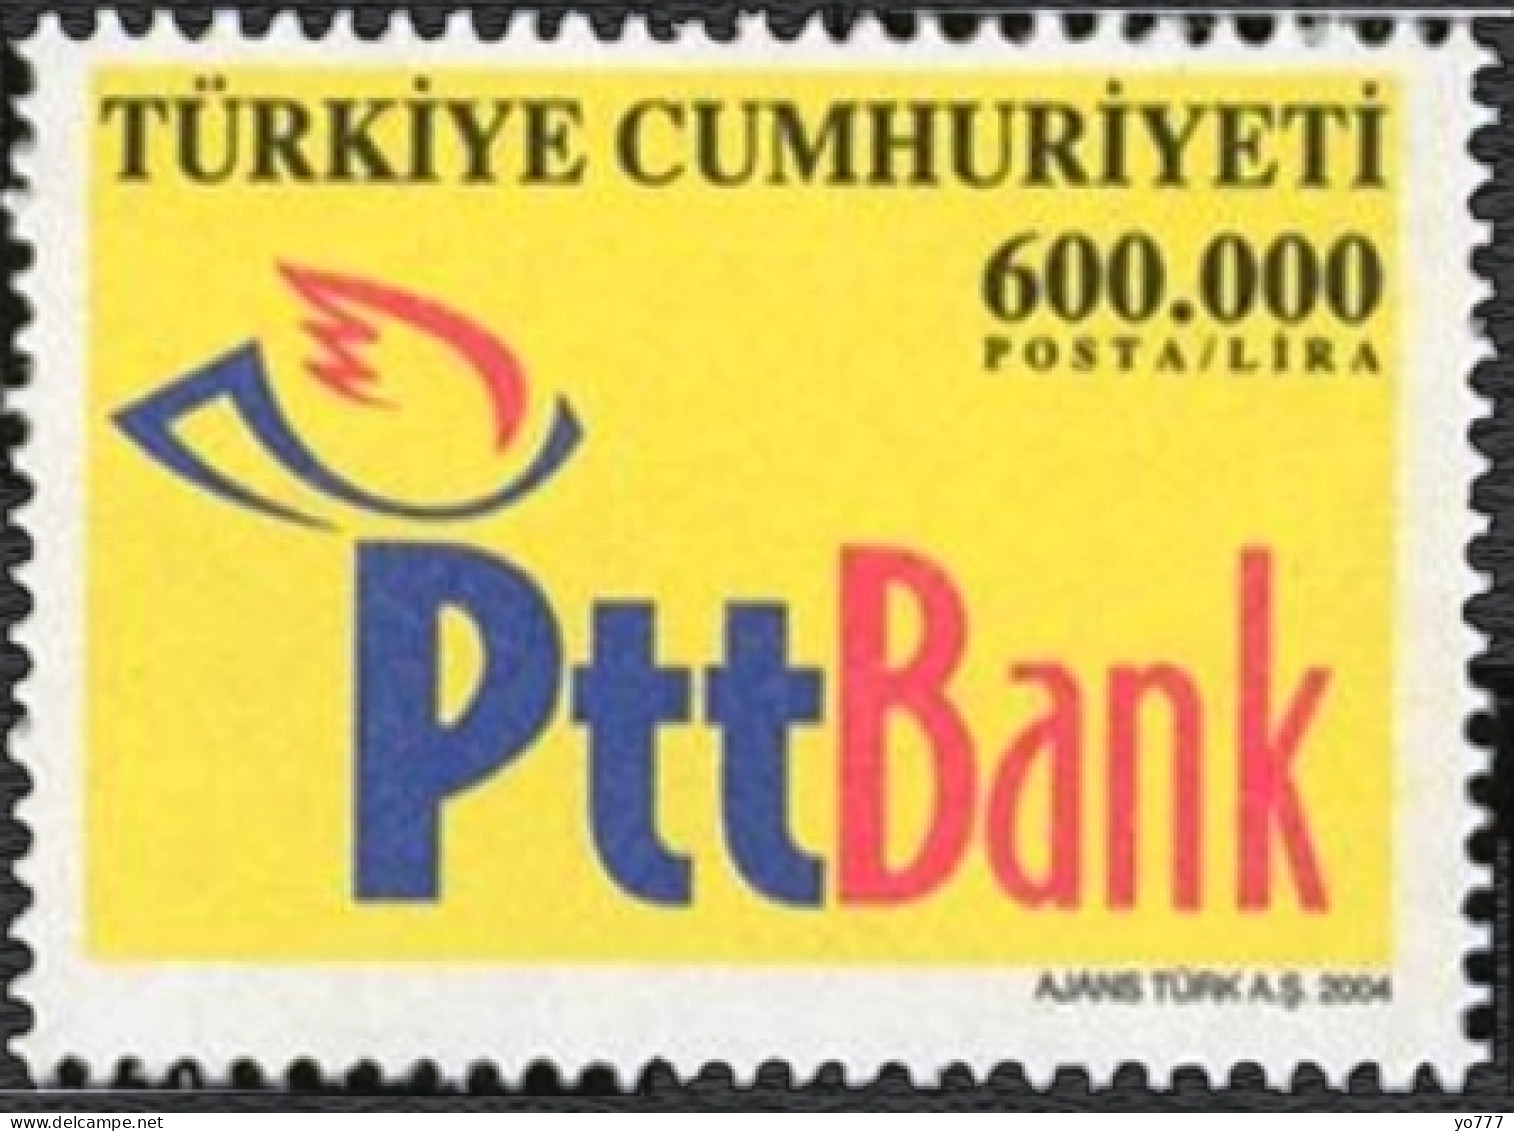 (3369) TURKEY REGULAR ISSUE STAMPS WITH THE THEME OF PTT BANK MNH** - Ongebruikt